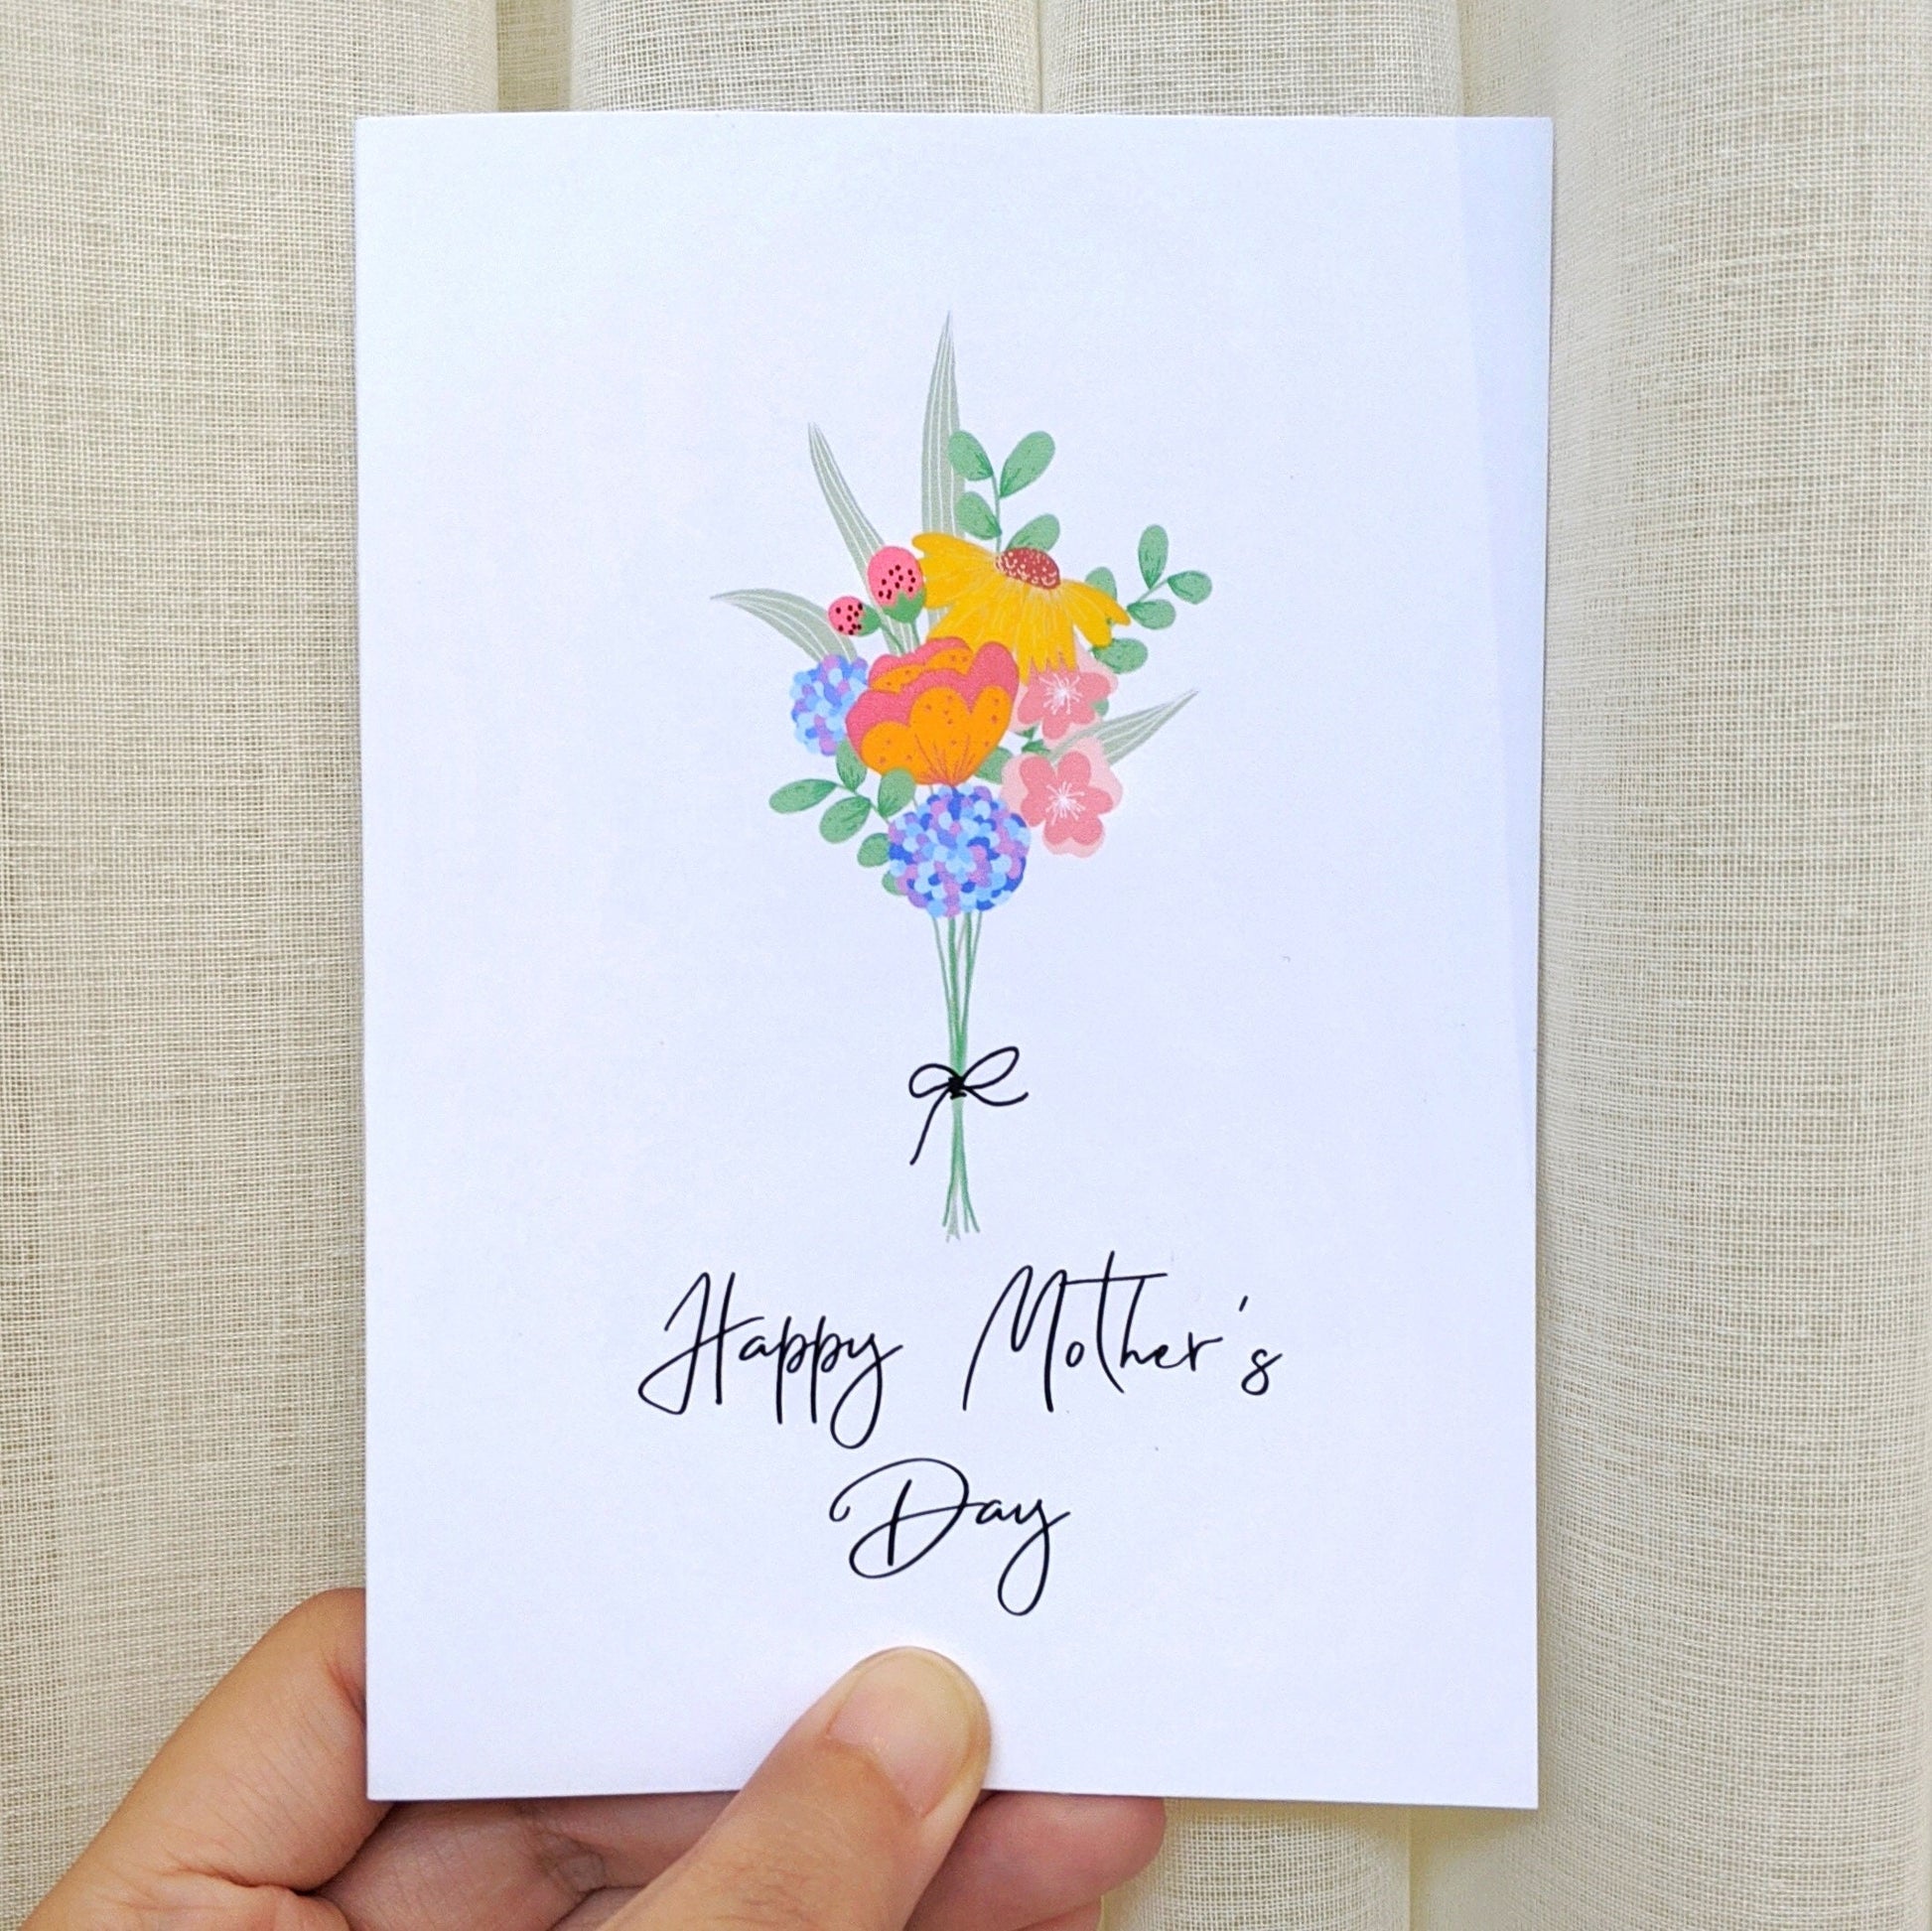 Greeting card held by hand with illustration of a colourful flower bouquet and lettering "Happy Mother's Day"